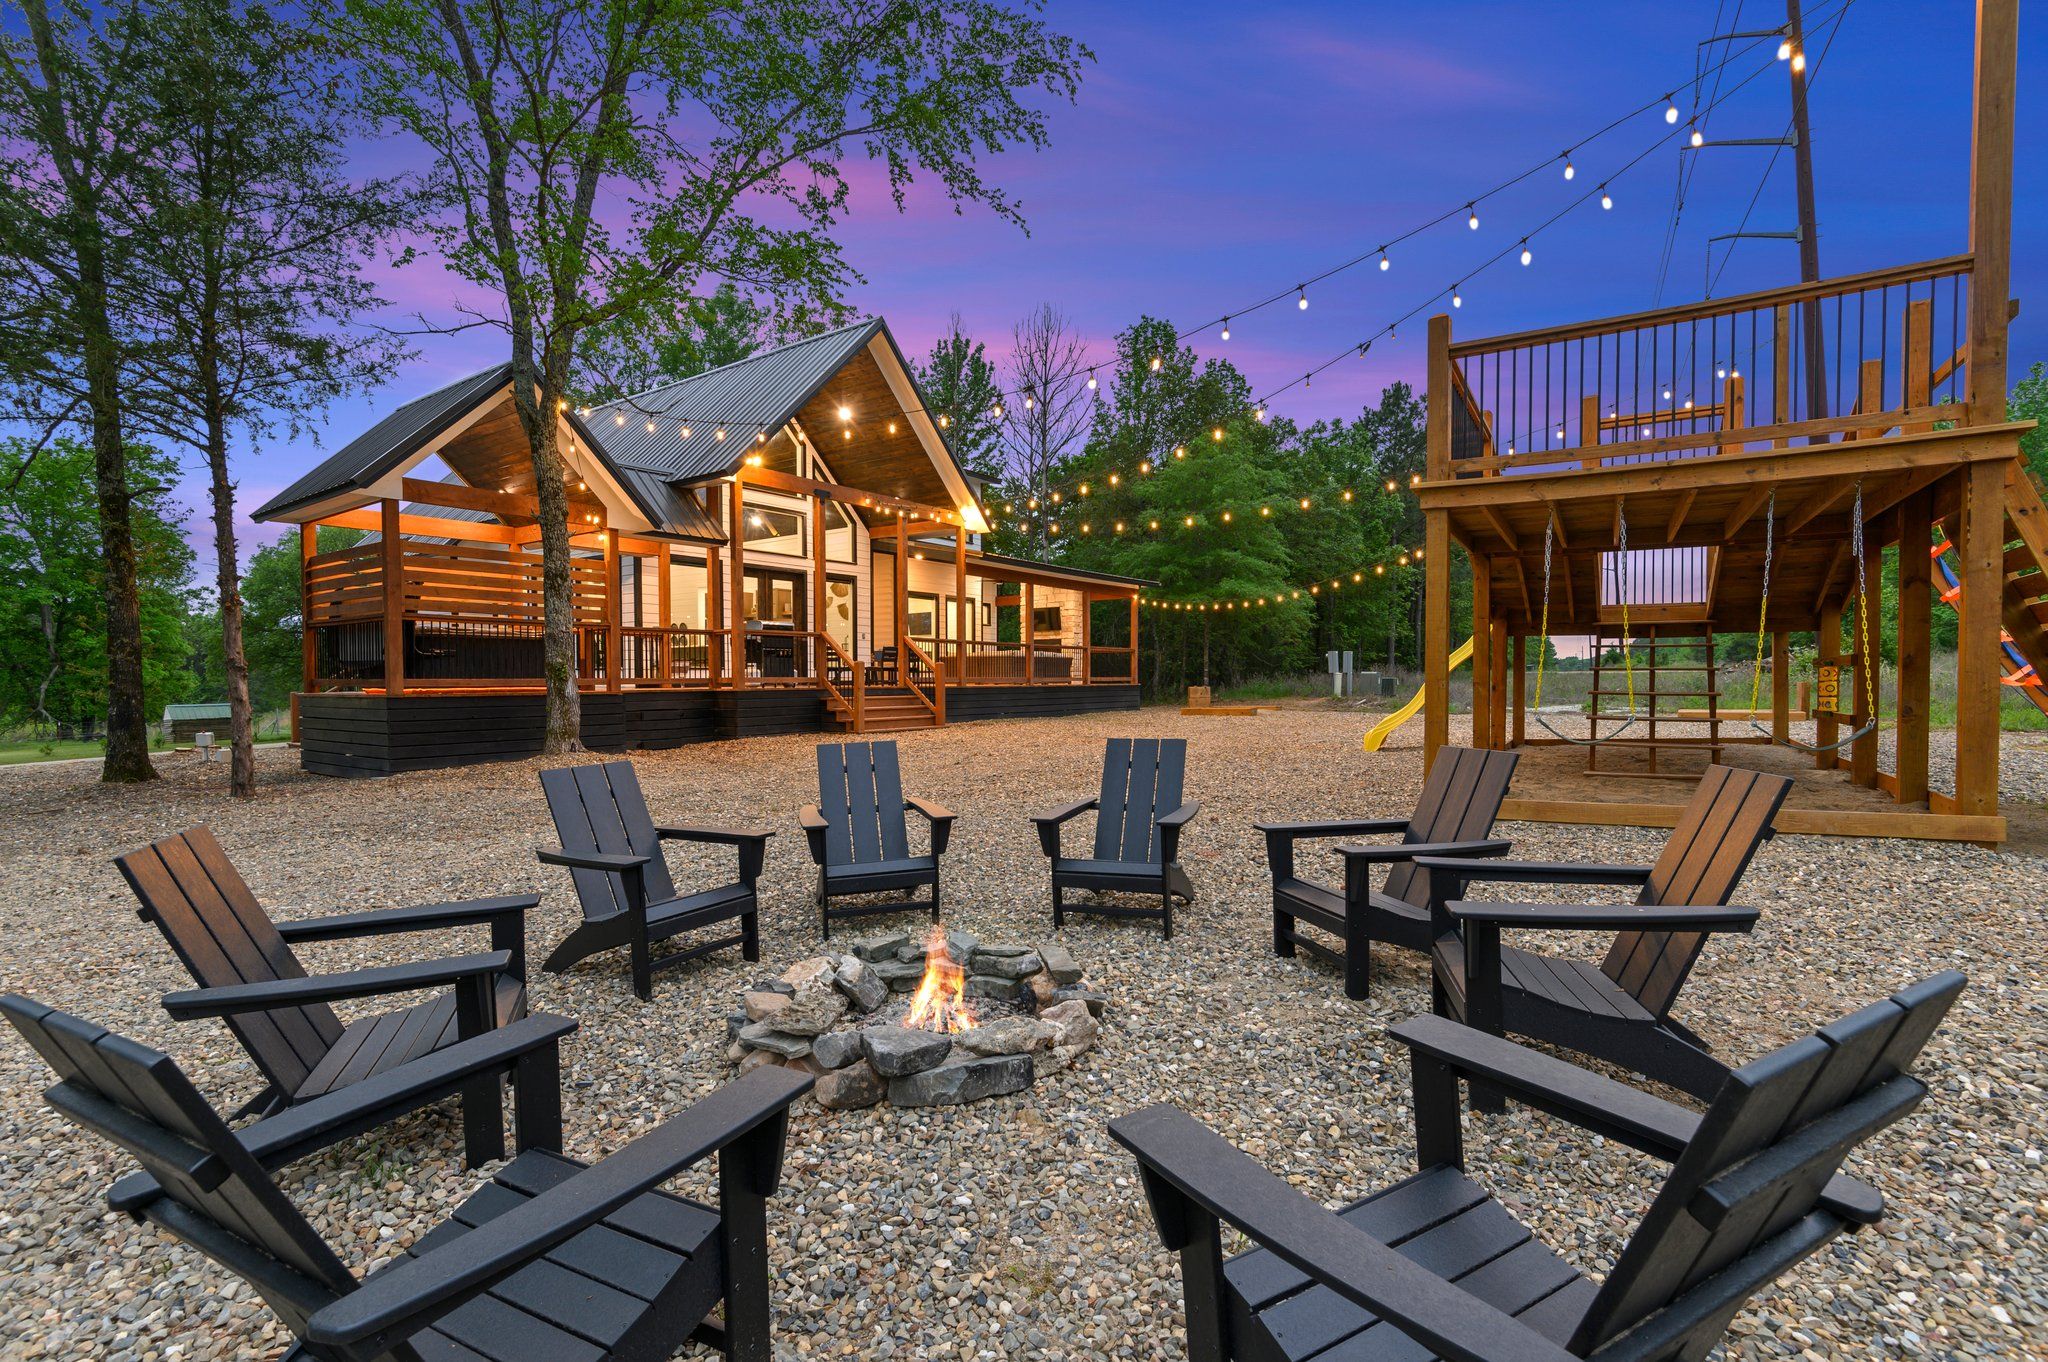 The backyard with a custom playscape and fire pit!